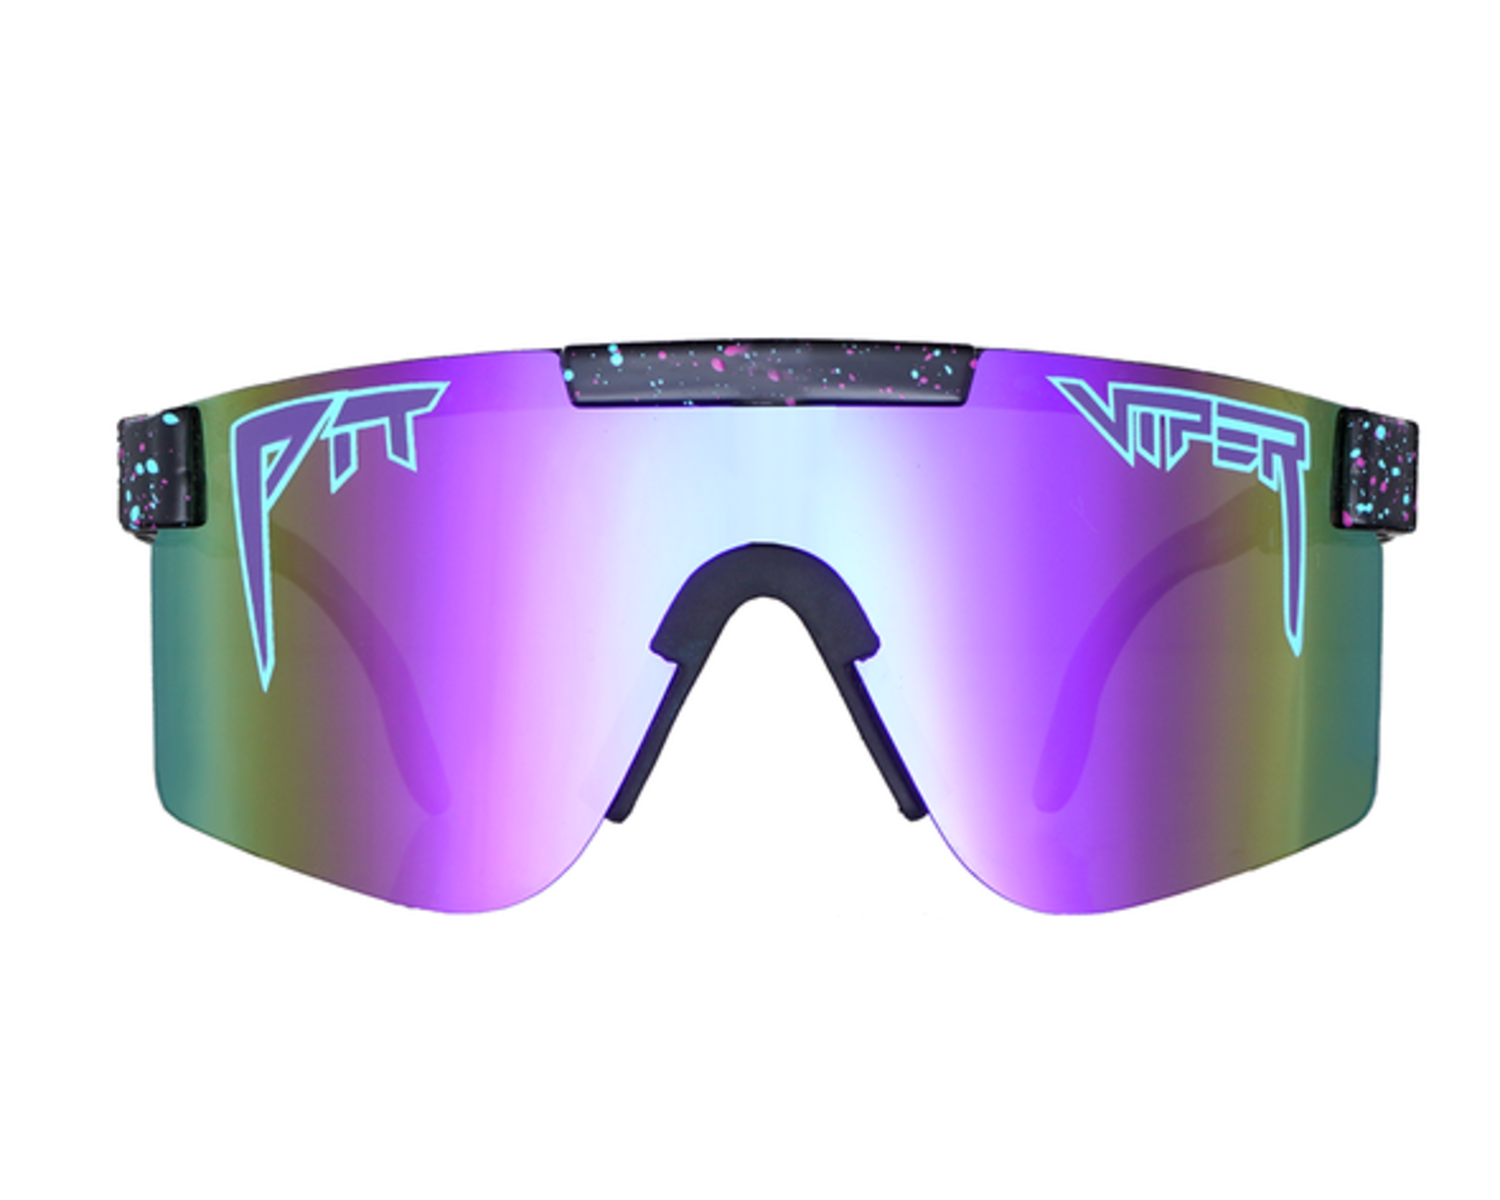 Pit Vipers - The Nightfall Polarized Sunglasses - Sully's Lifestyle